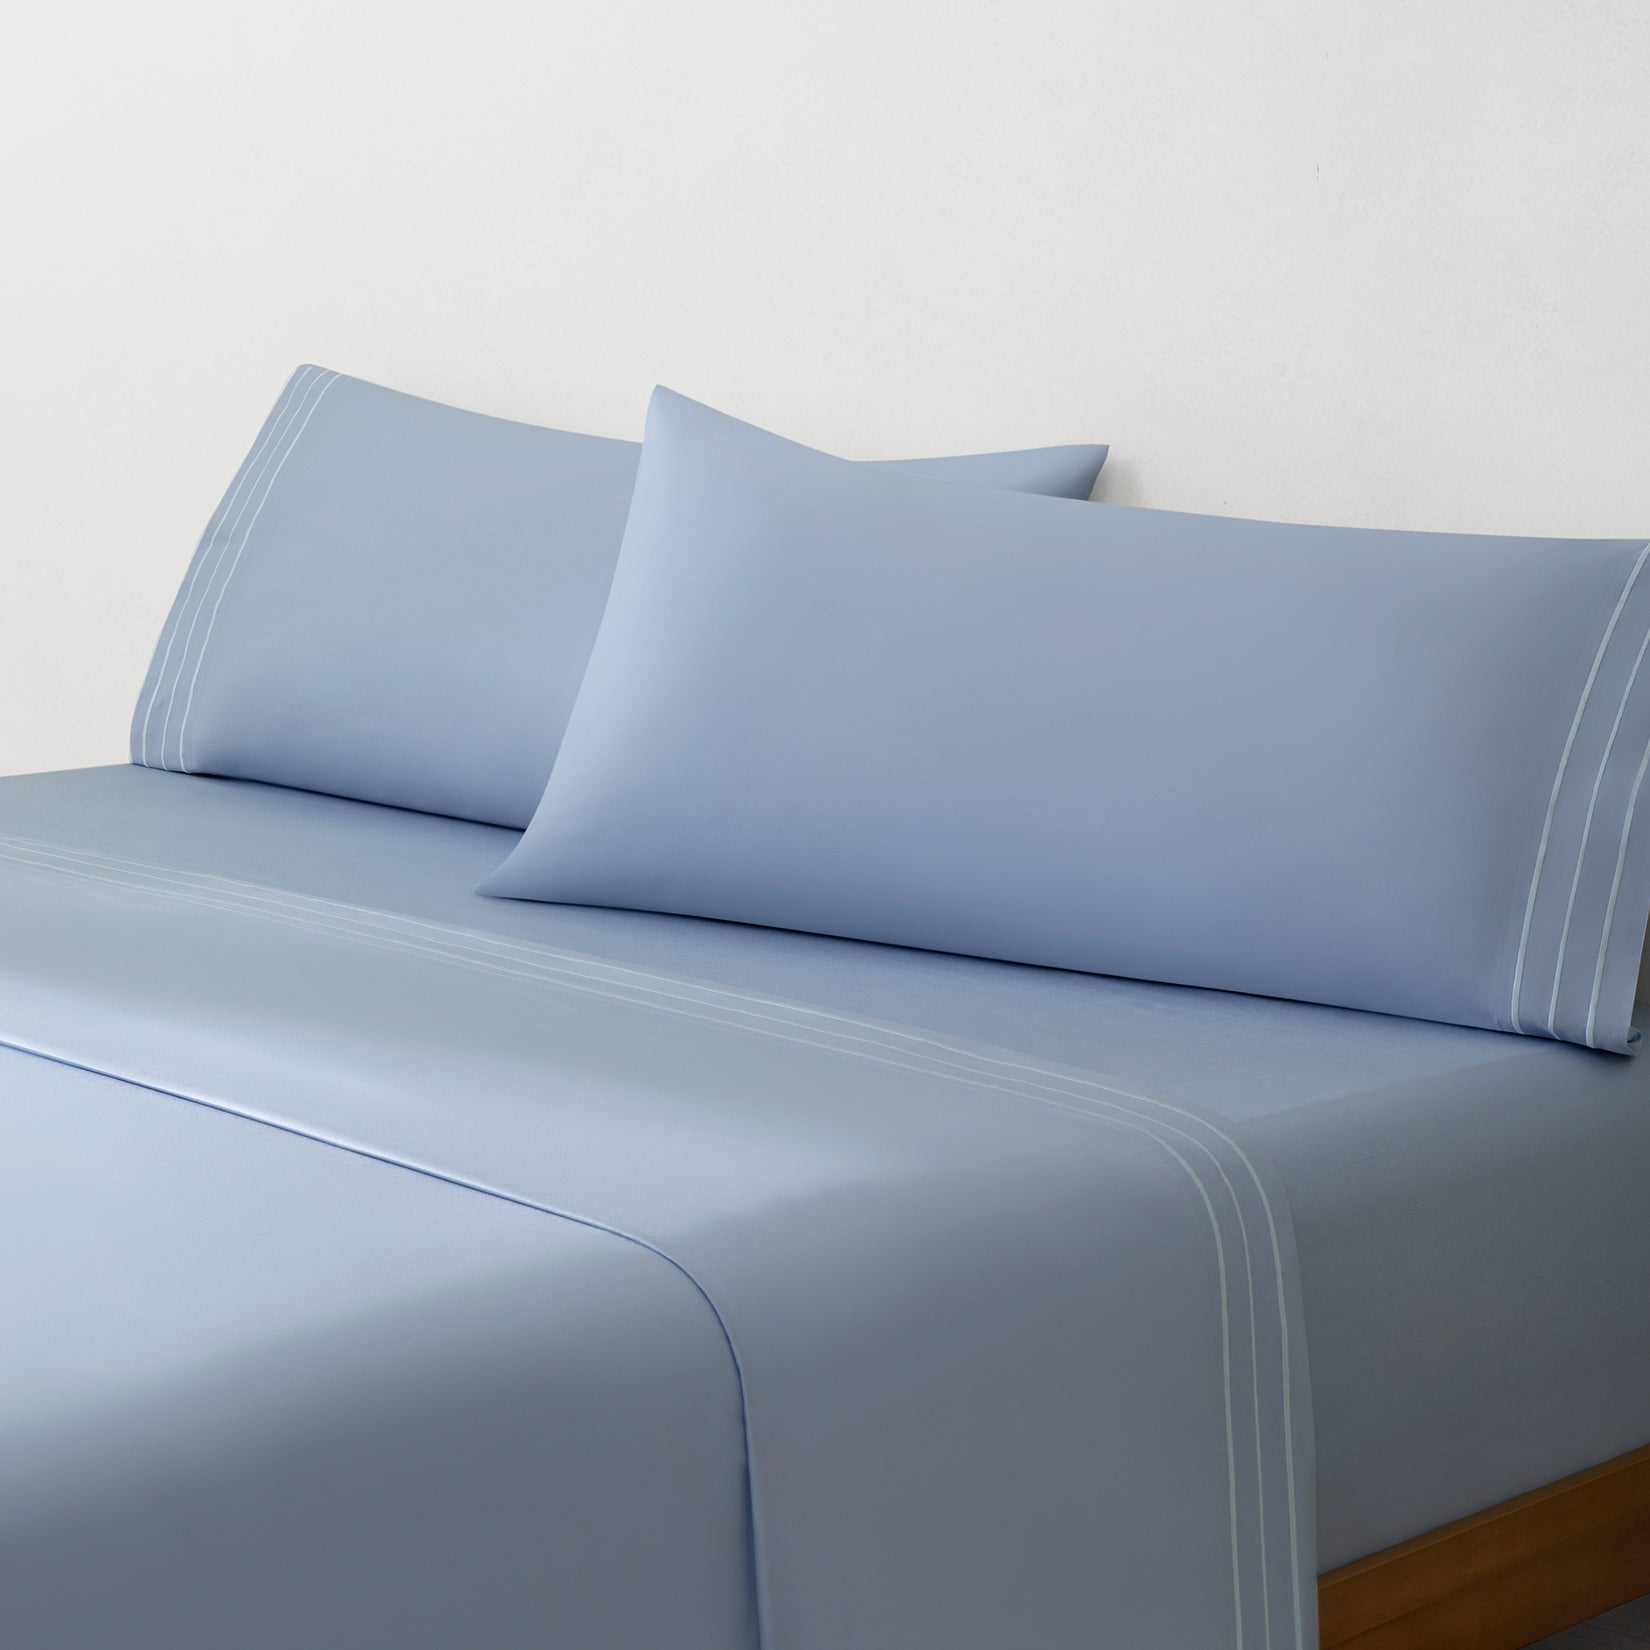 Paulina Sky Blue Satin Stitched Cuff 200 thread count cotton bed sheet set. Sky blue pillows and sky blue cotton sheets on bed.